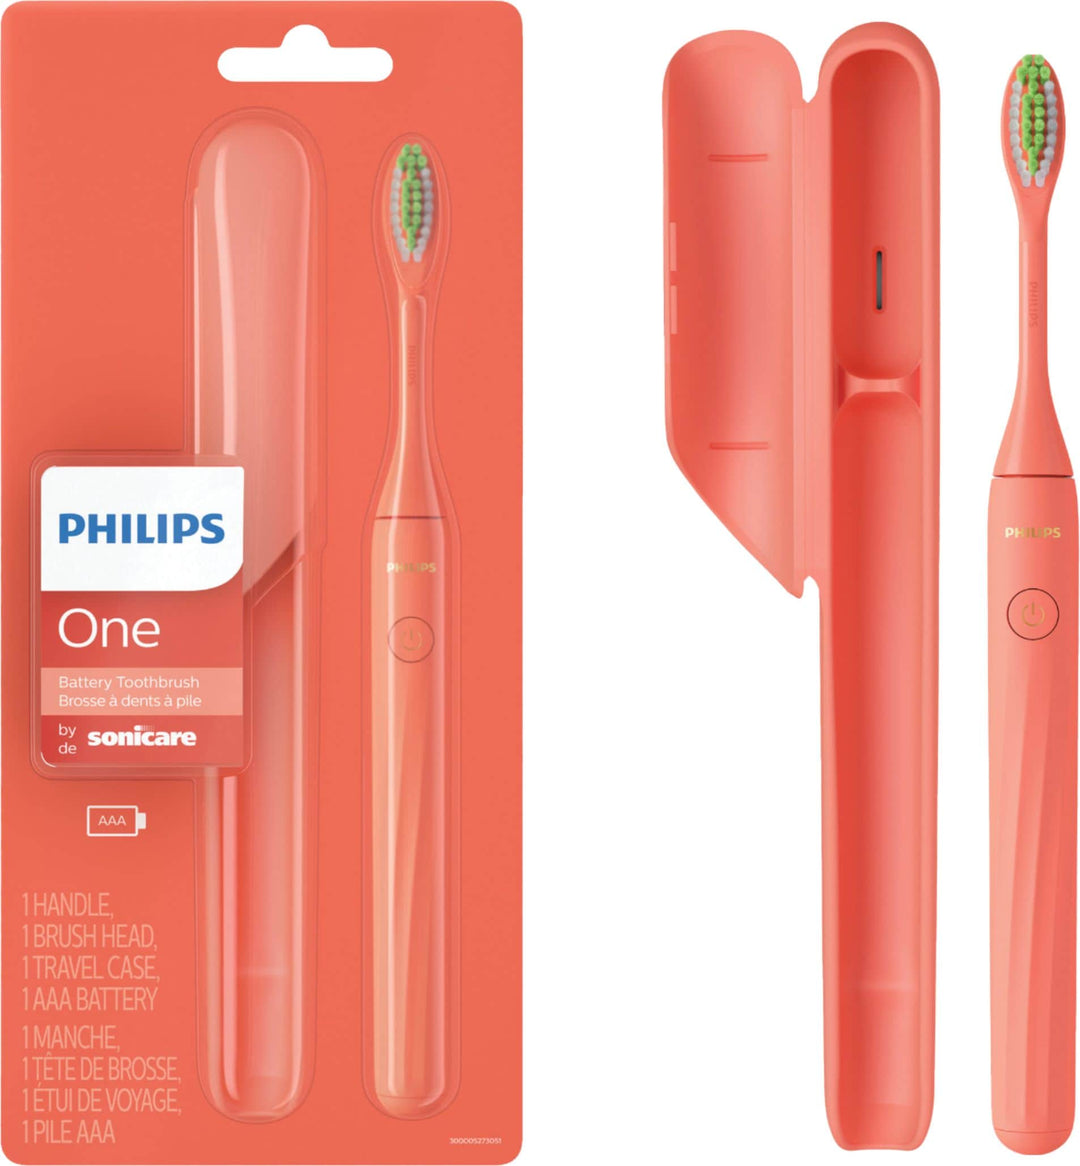 Philips Sonicare - Philips One by Sonicare Battery Toothbrush - Miami Coral_0